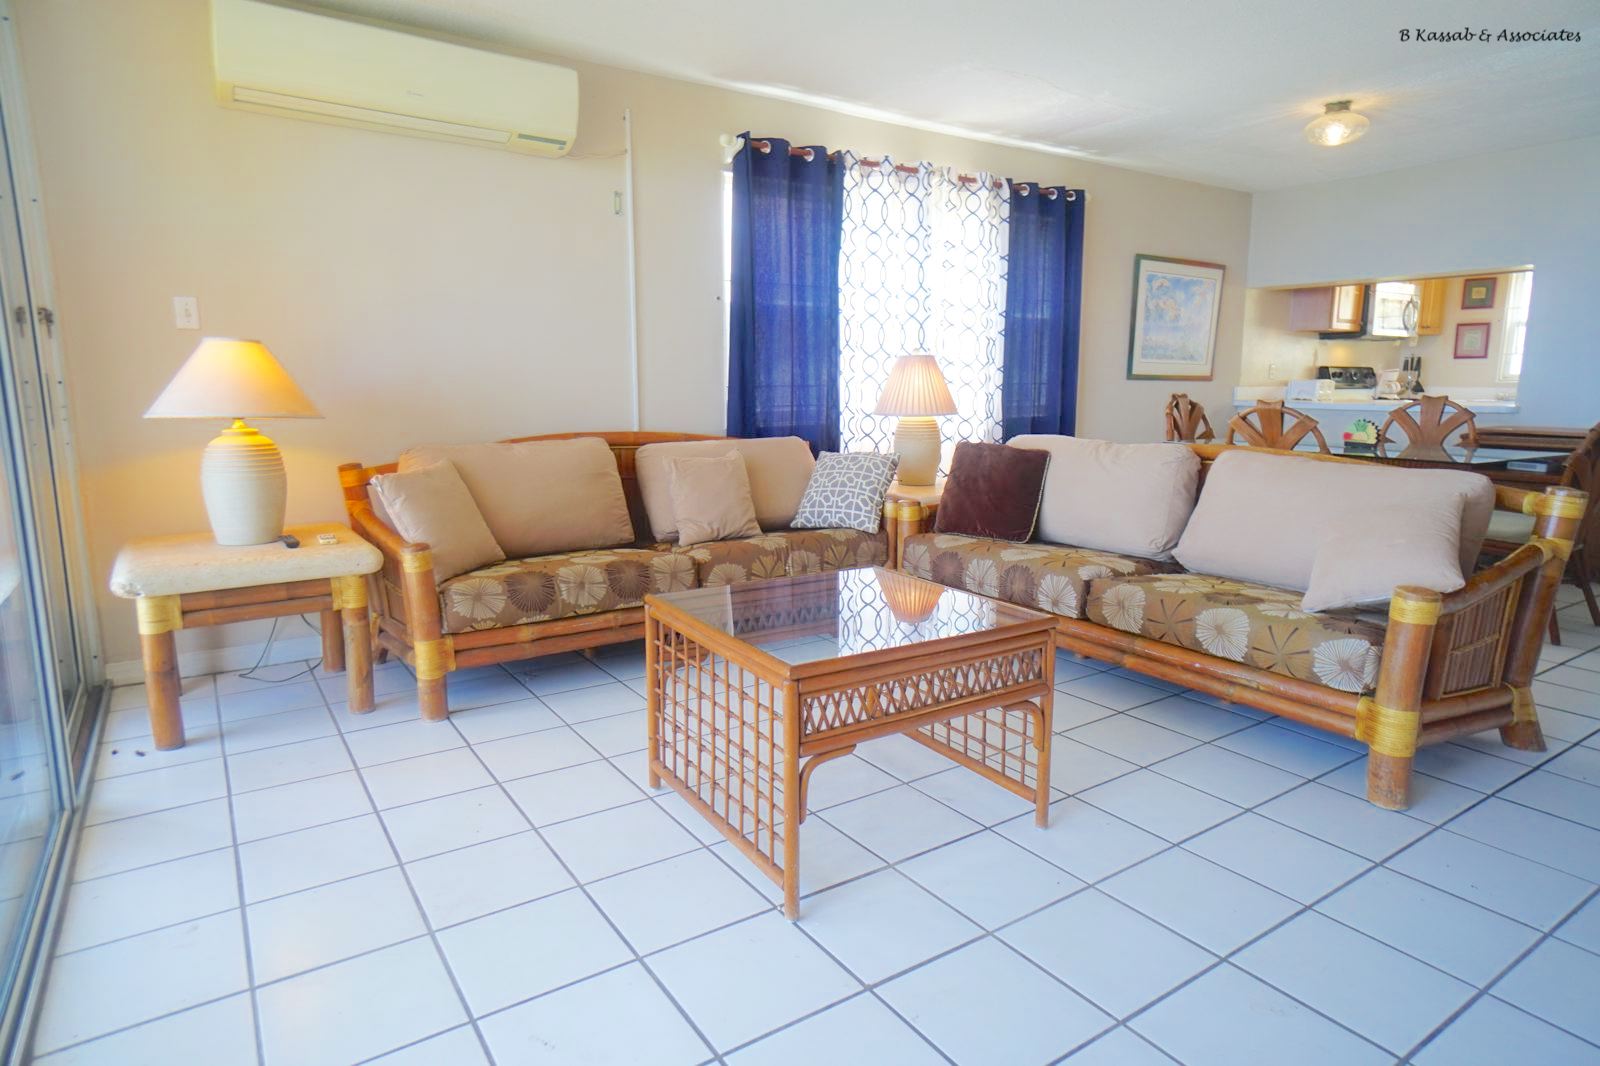 Click here to see rental listing details and photos for this St Kitts and Nevis Real Estate Rental Property